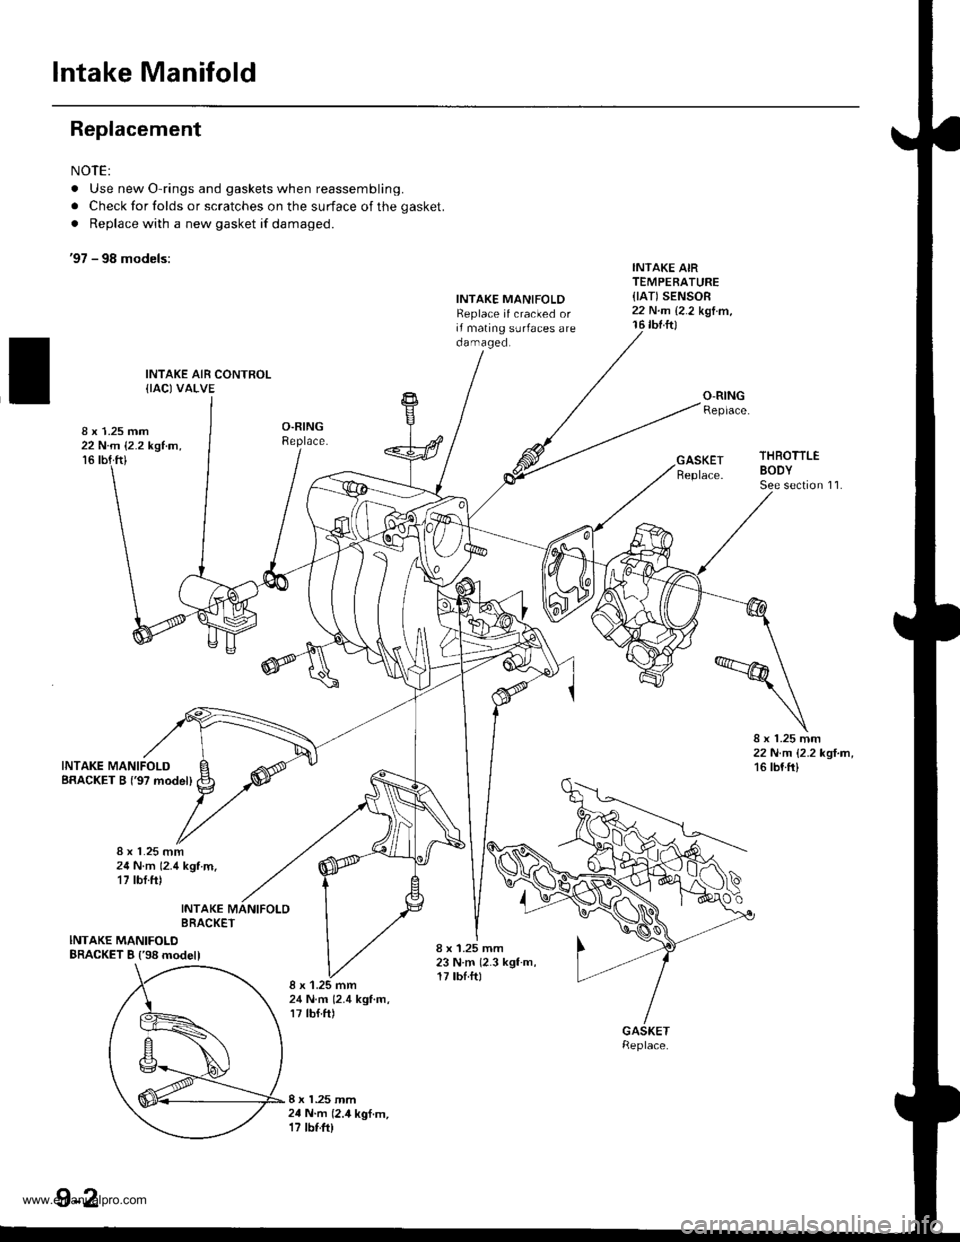 HONDA CR-V 2000 RD1-RD3 / 1.G Workshop Manual 
Intake Manifold
Replacement
NOTE:
. Use new O-rings and gaskets when reassembling.
. Check for folds or scratches on the surface of the gasket.
. Replace with a new gasket if damaged.
97 - 98 models